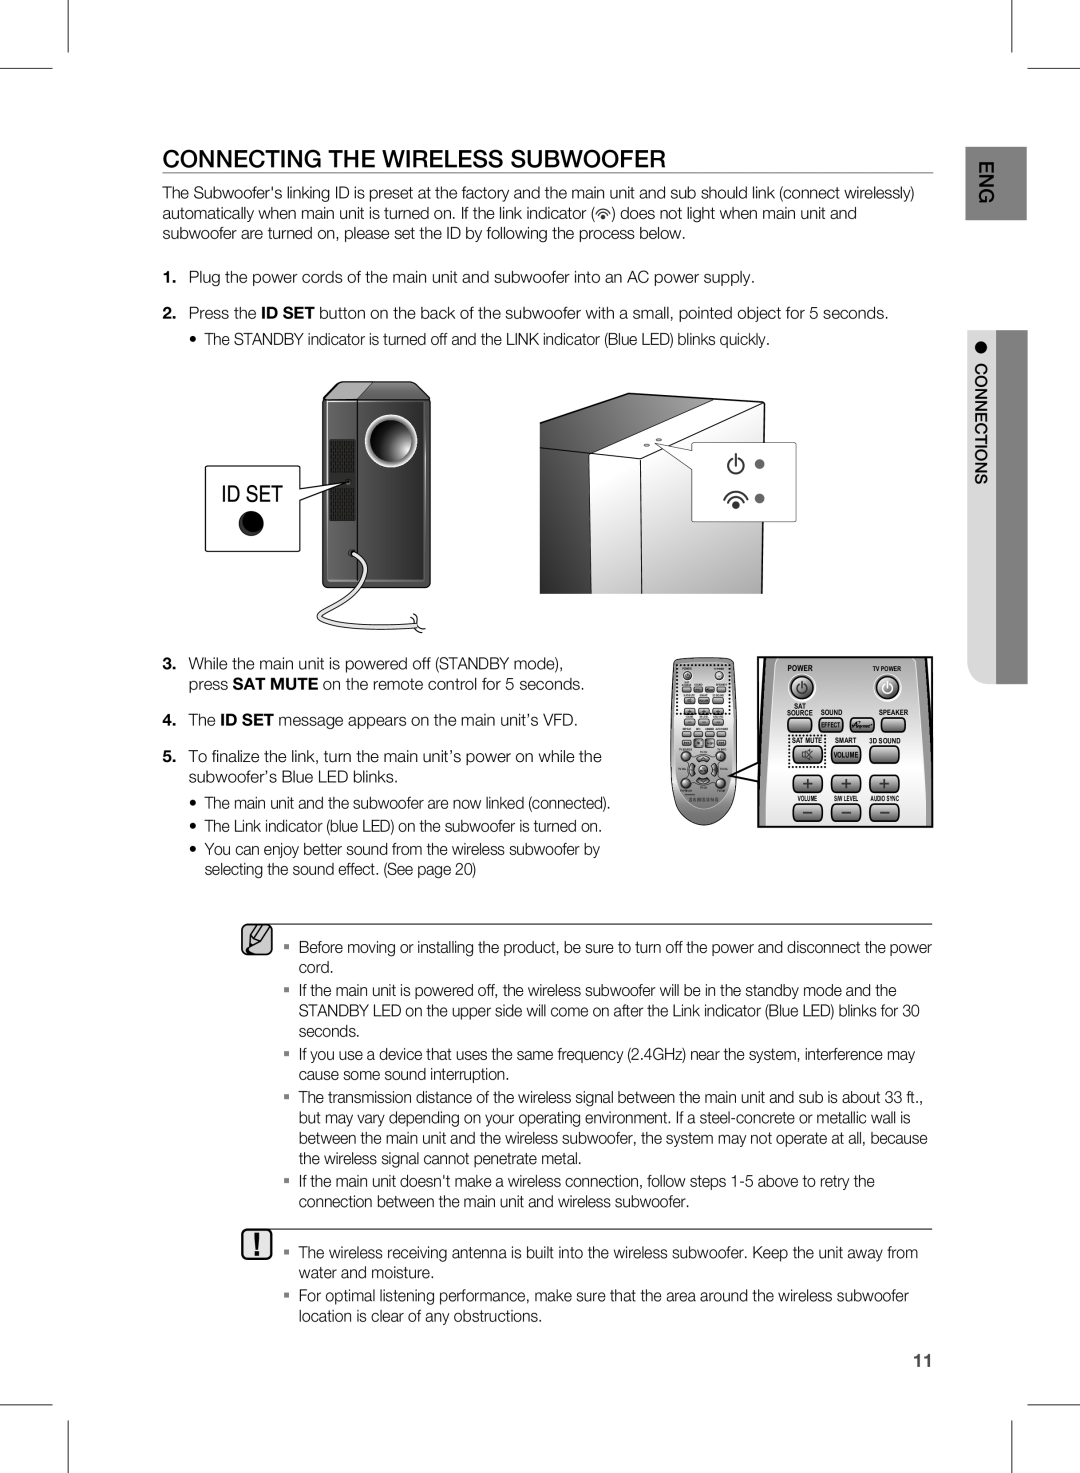 Samsung HW-E450C user manual CONNECTING THE WIrElESS SUBWOOFEr 